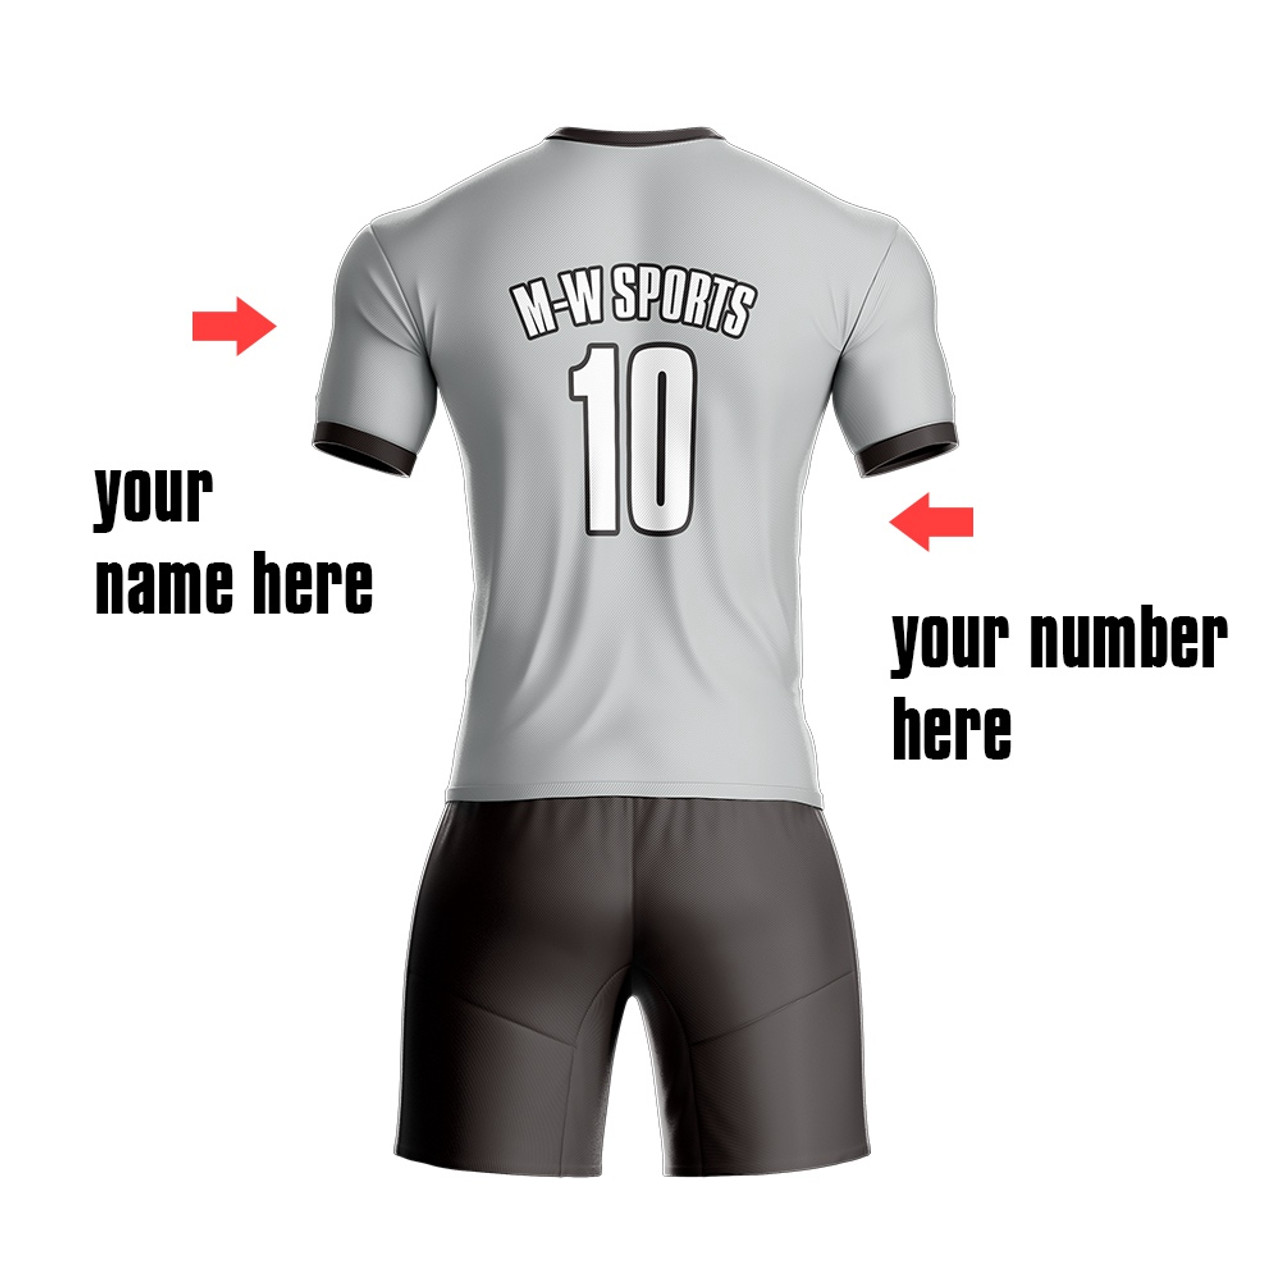 Custom Dry Fit Soccer Uniform Color Grey High Quality Football Jerseys  Printing Names And Numbers